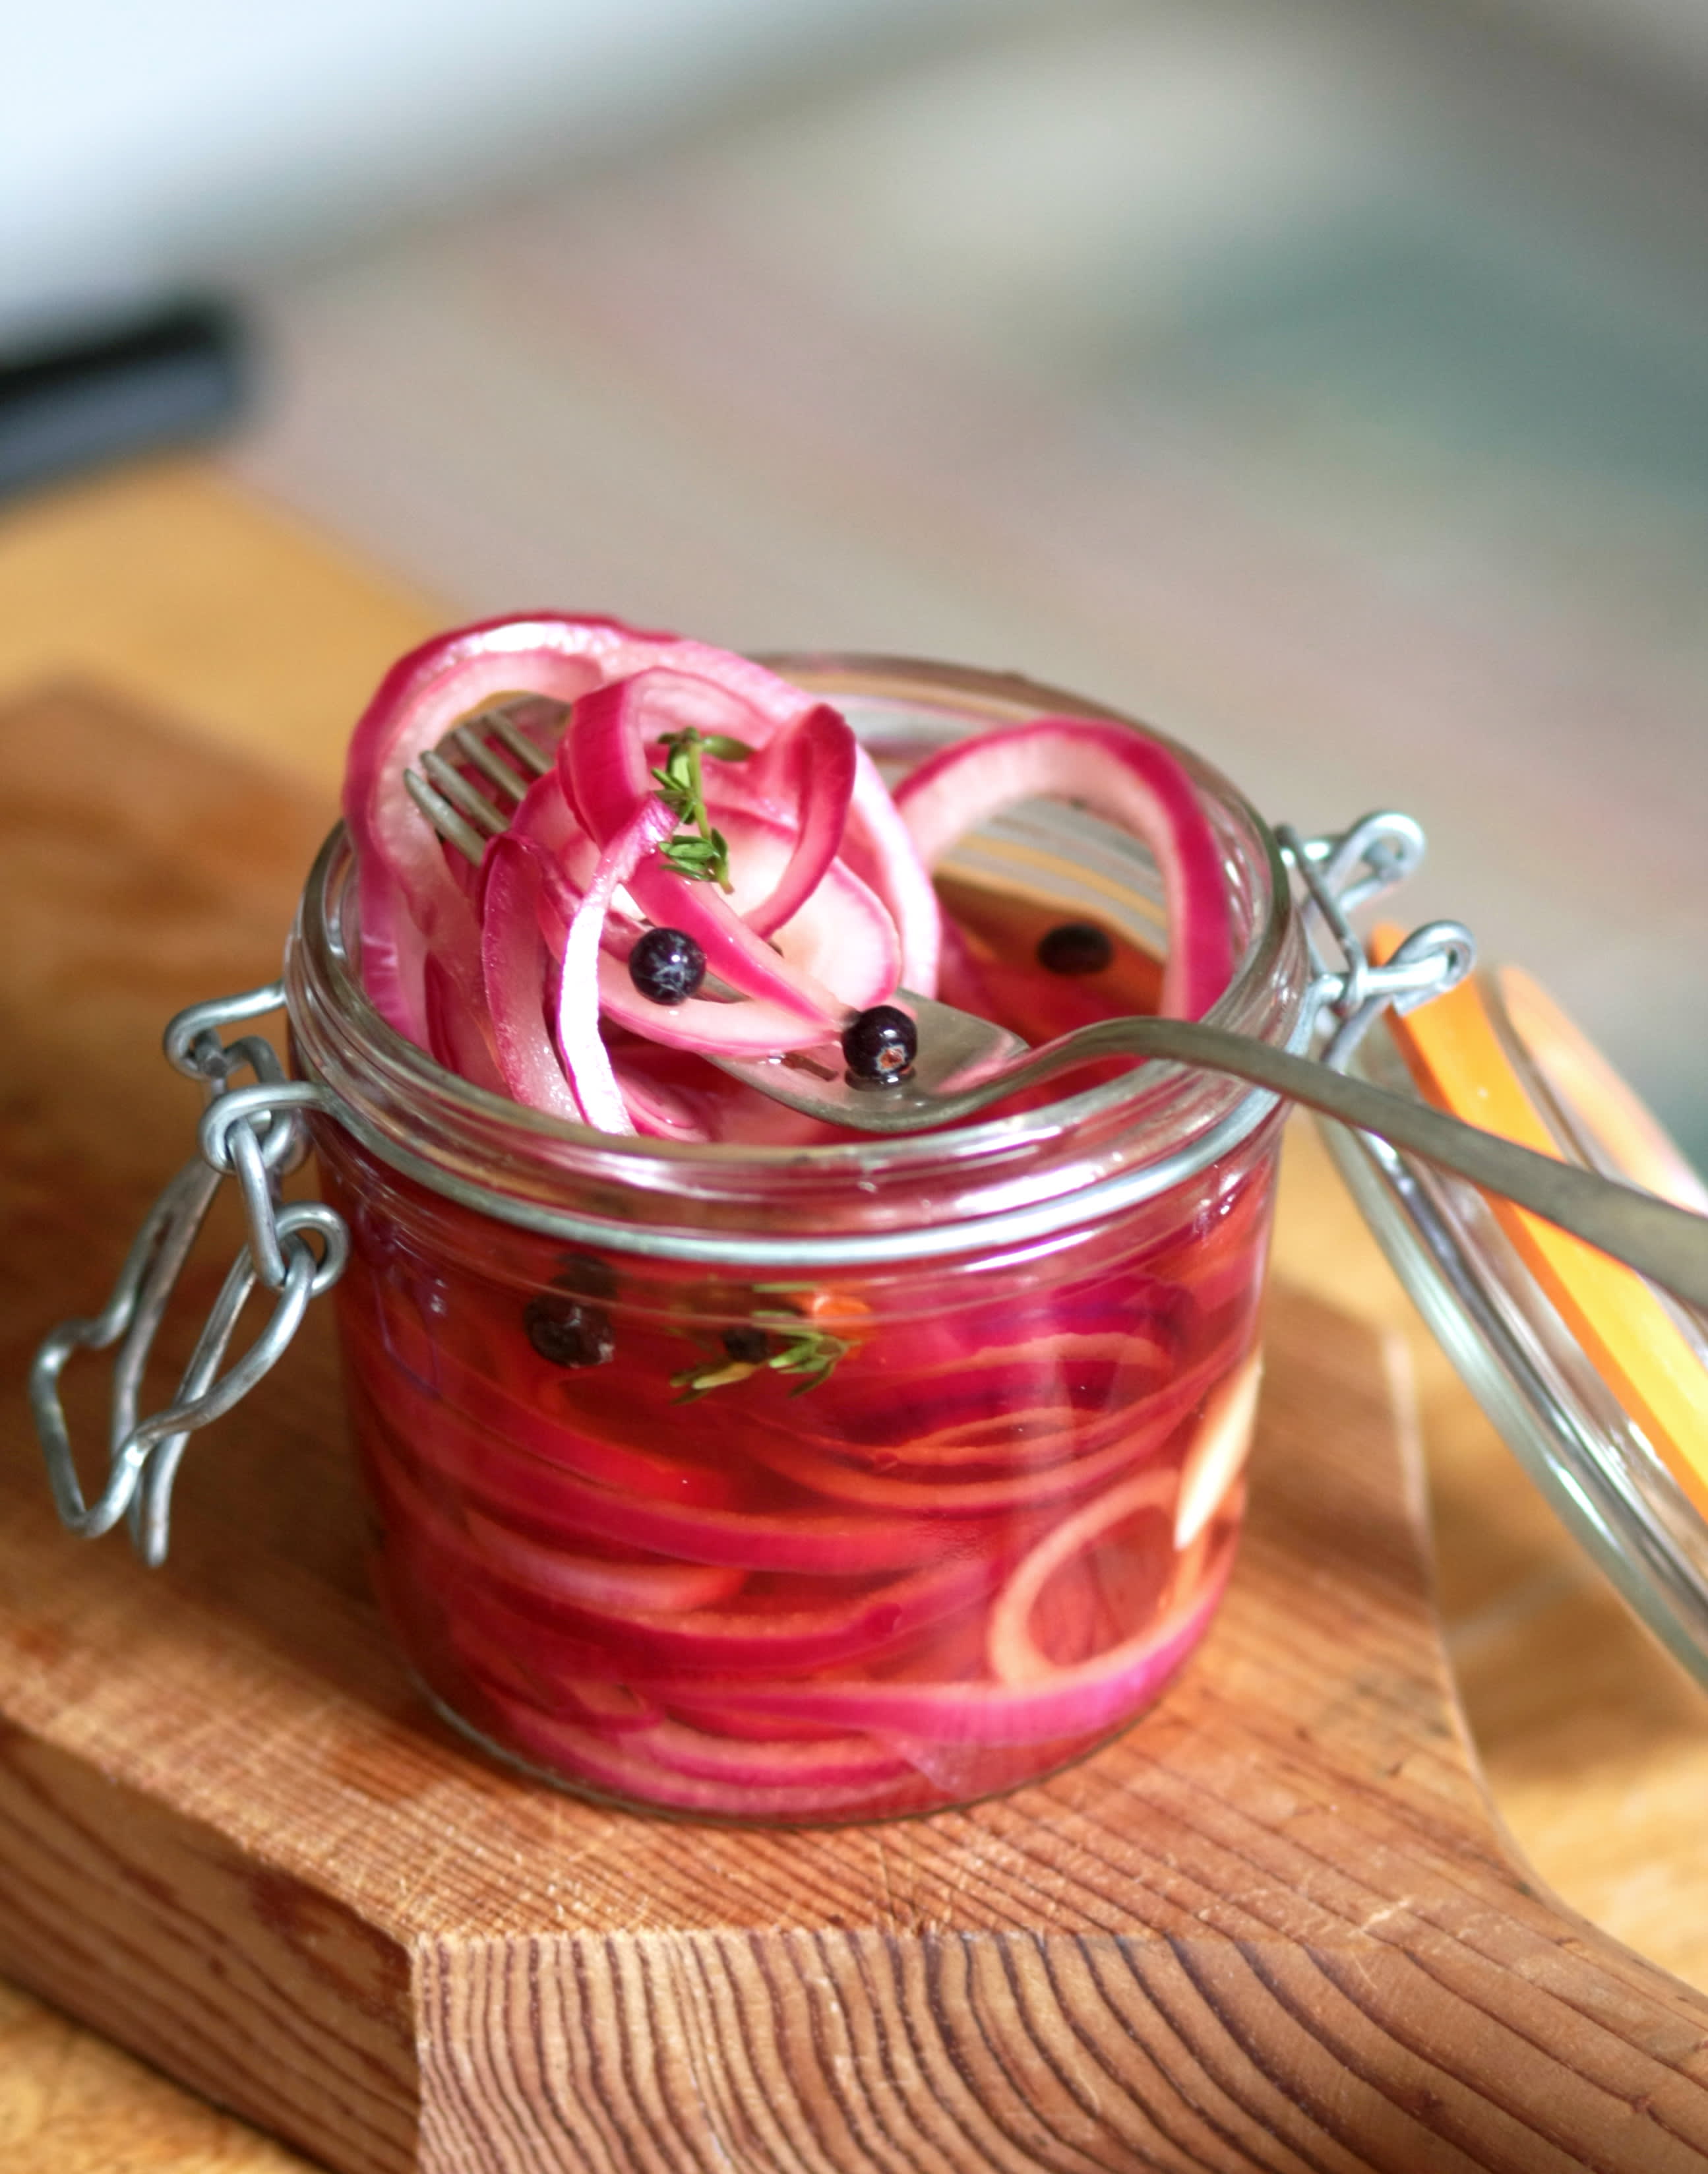 Quick Pickled Red Onions Recipe l Panning The Globe